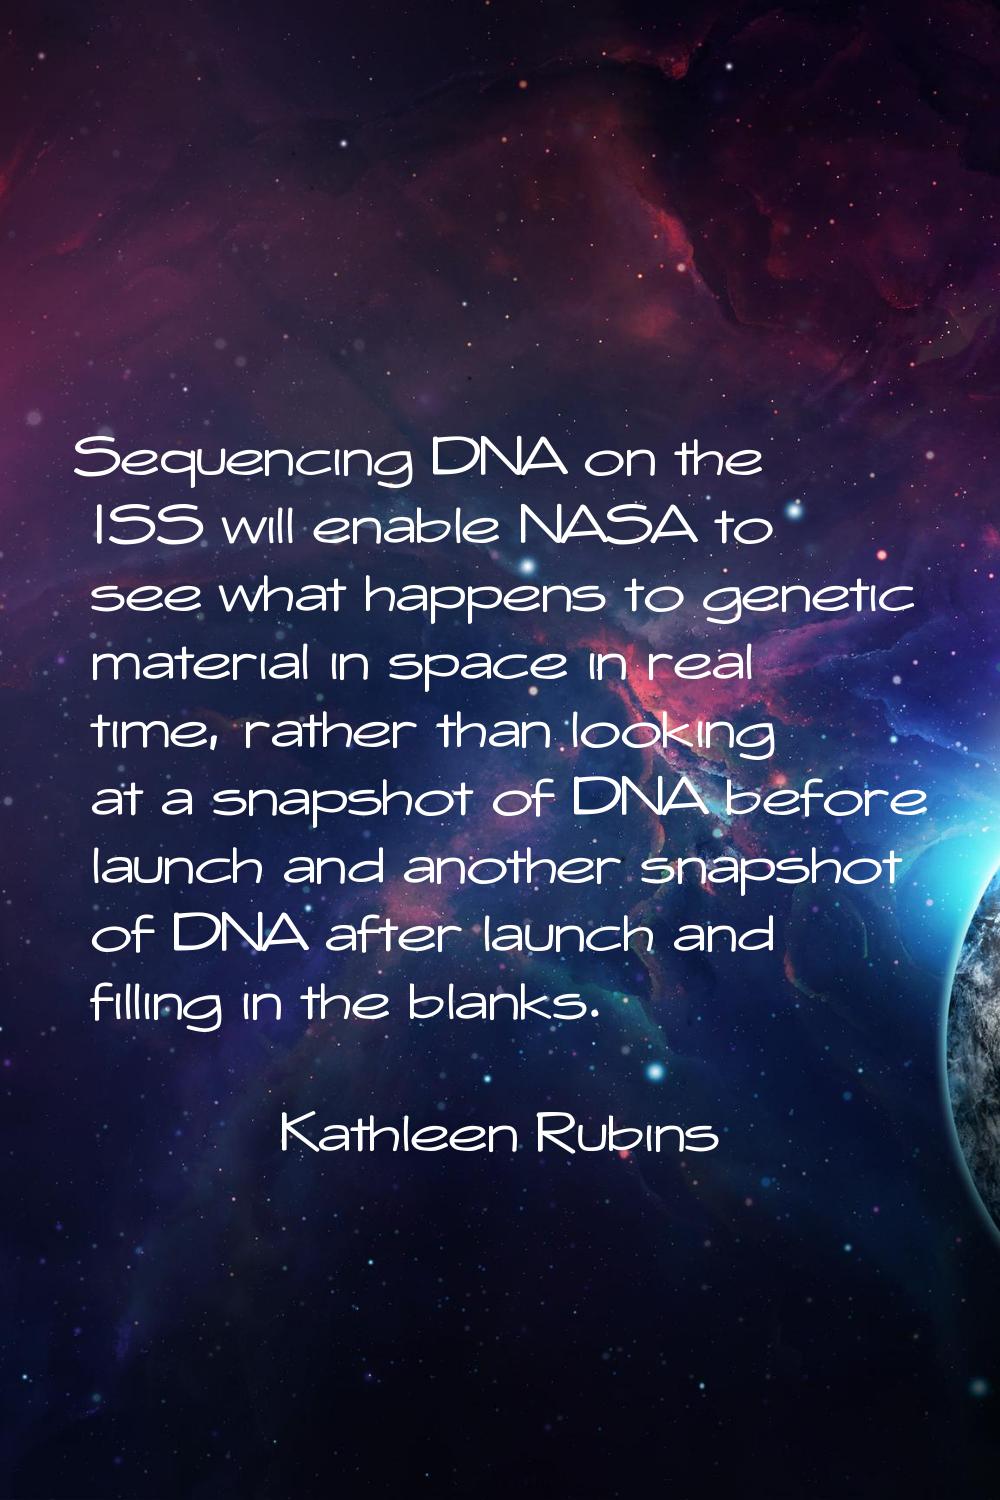 Sequencing DNA on the ISS will enable NASA to see what happens to genetic material in space in real